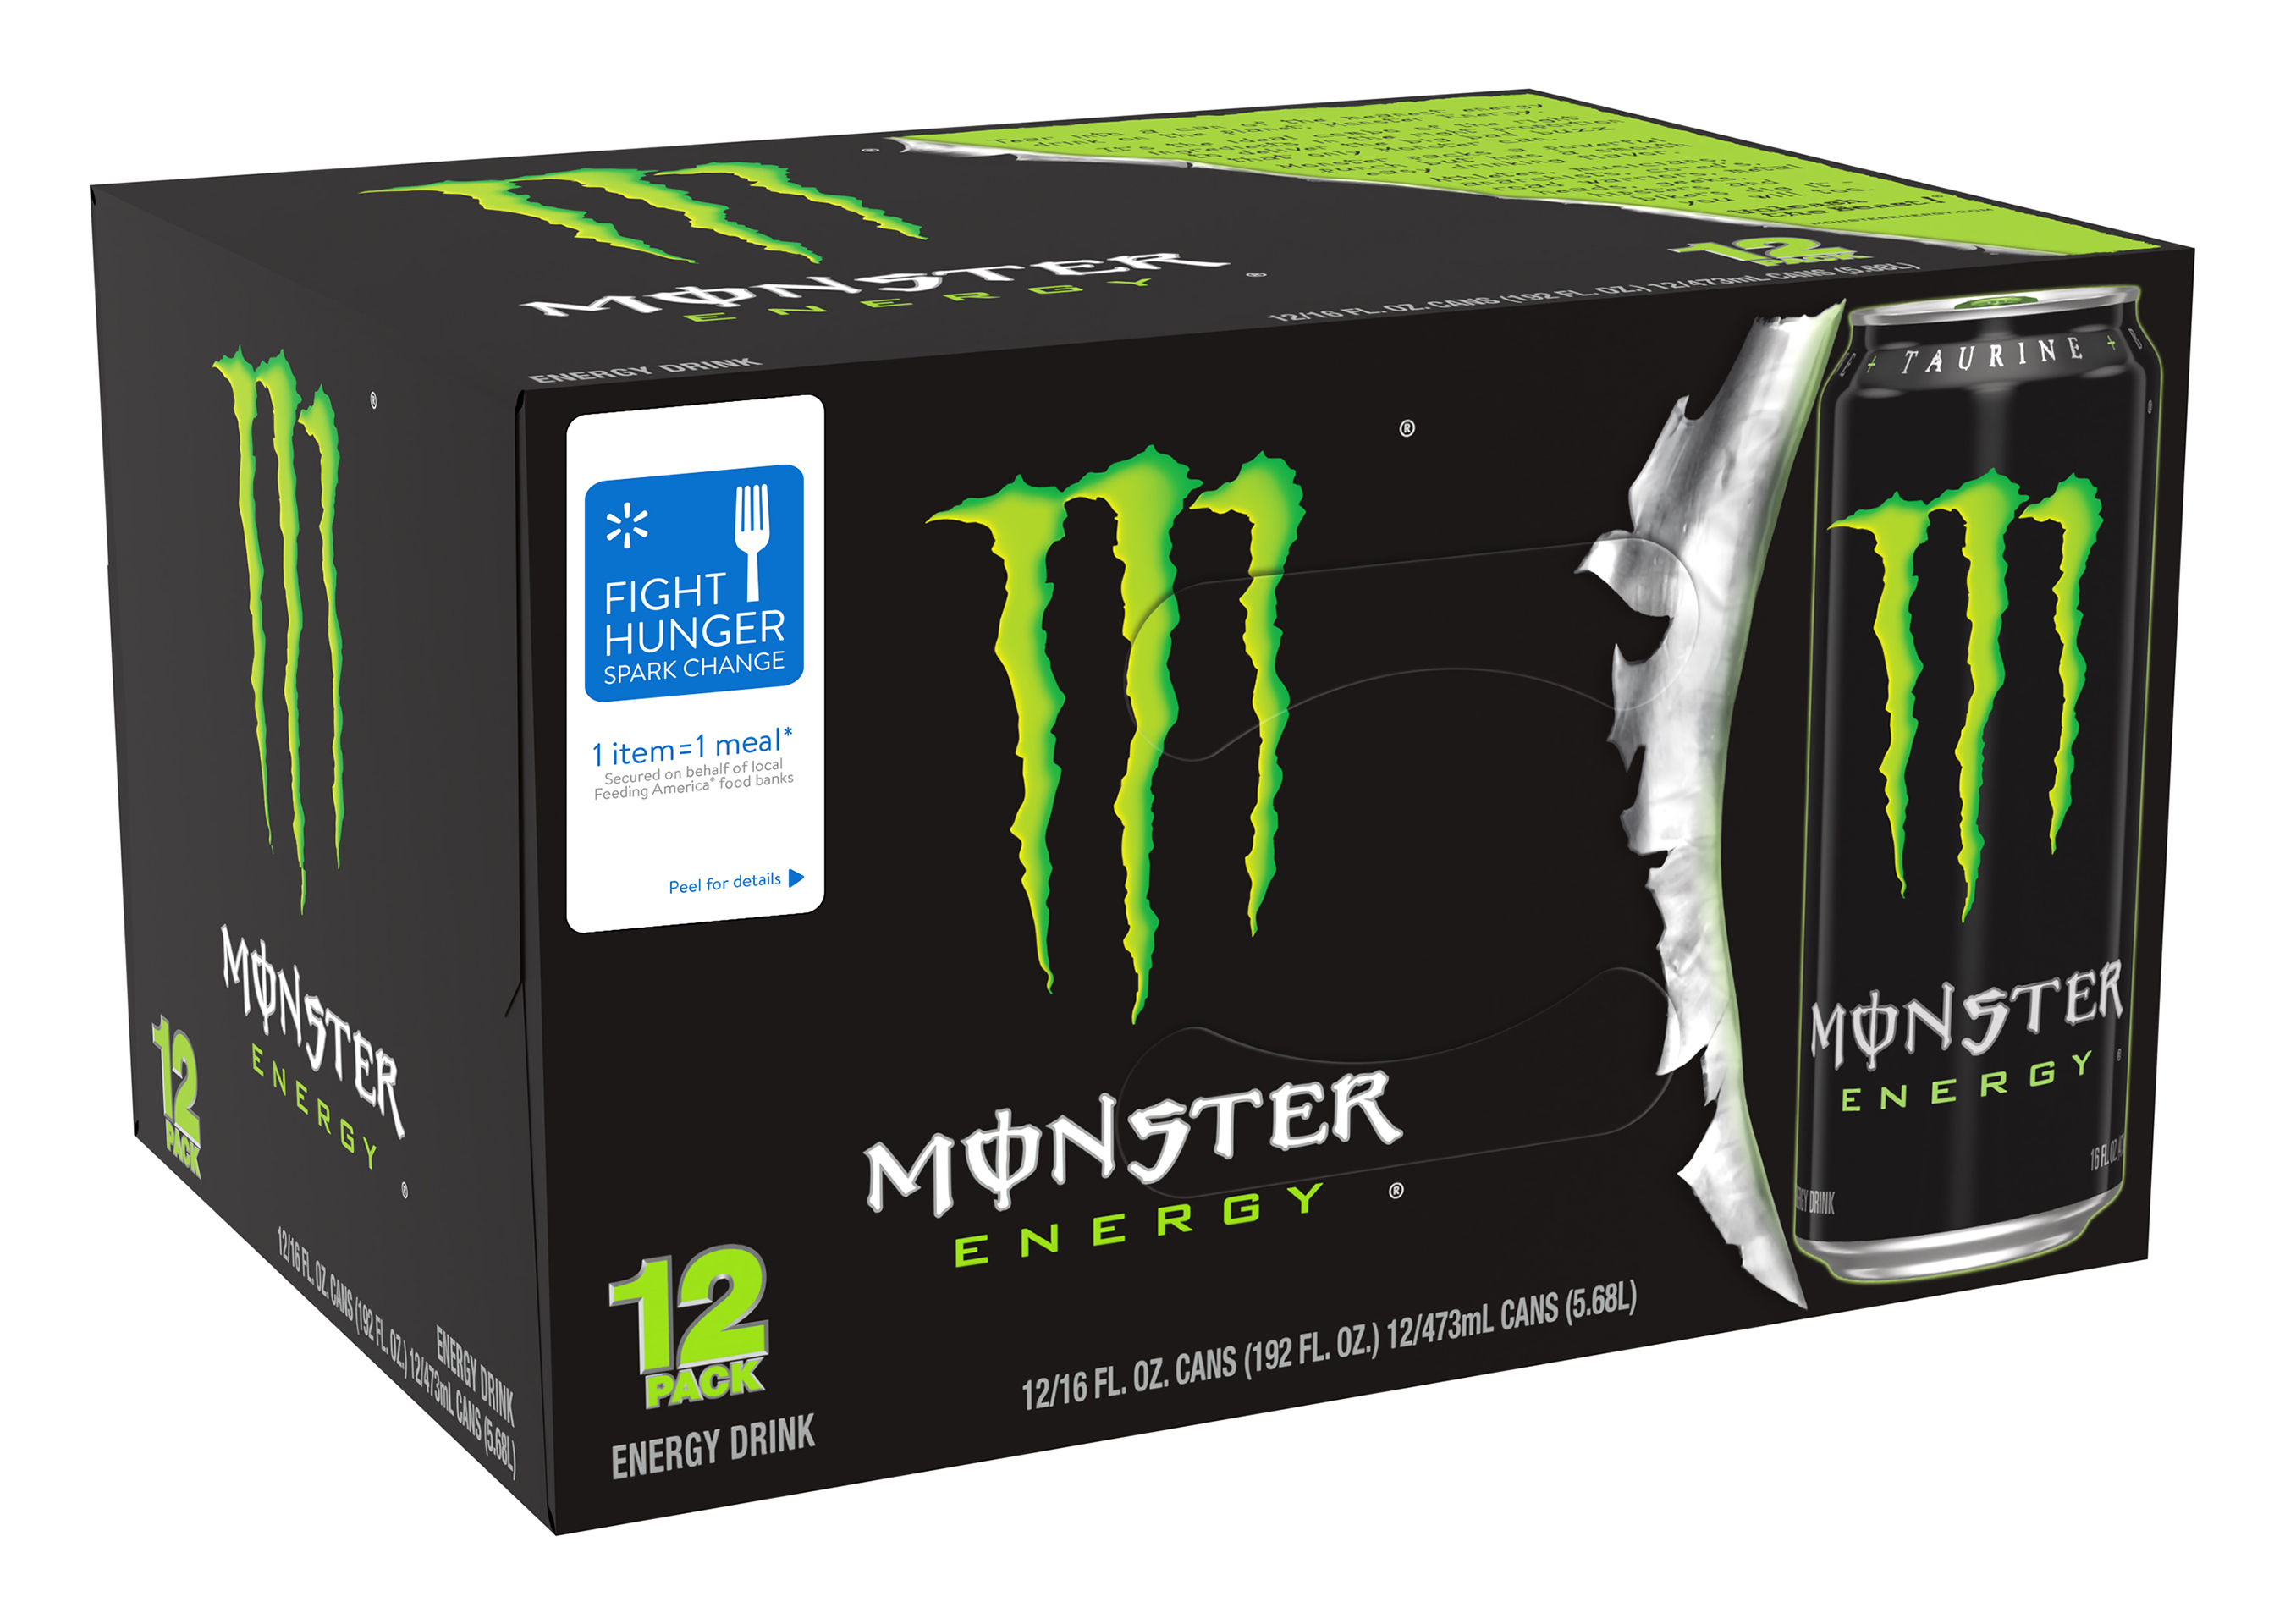 Monster Energy committed to donate between $70,000 and $130,000 this year, based on sales results.